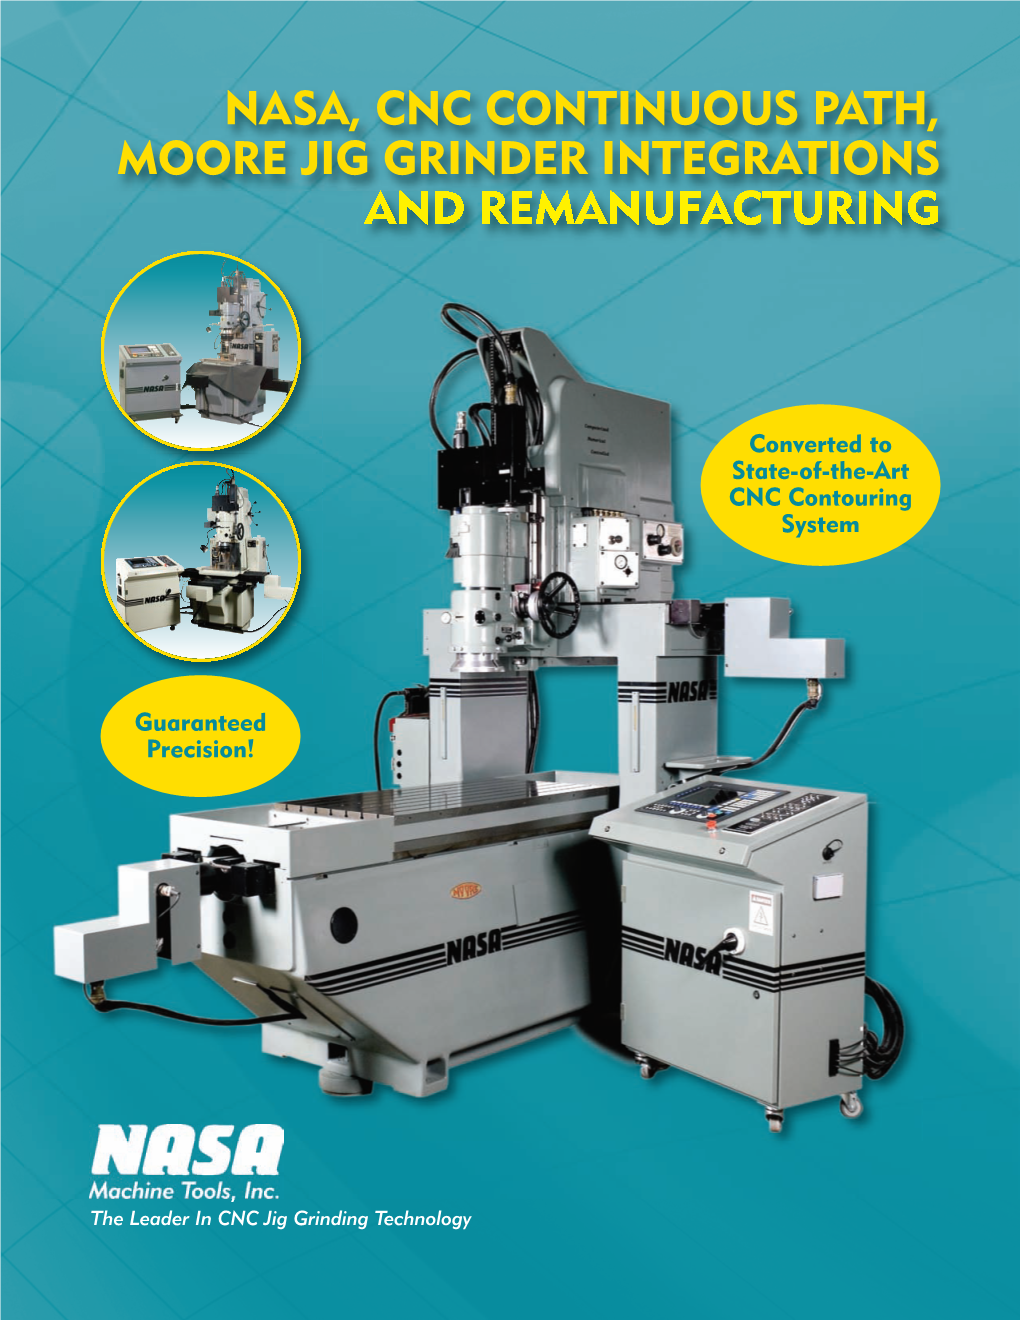 Nasa, Cnc Continuous Path, Moore Jig Grinder Integrations and Remanufacturing